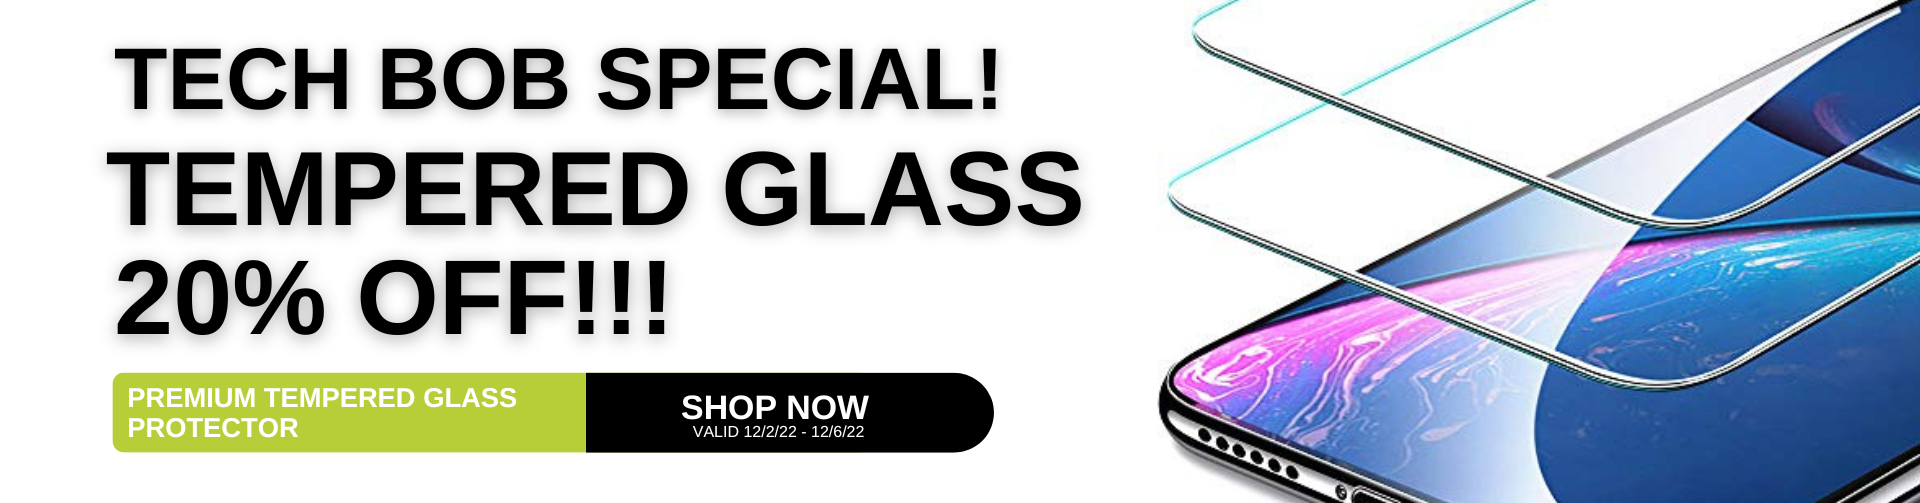 Tempered Glass Special